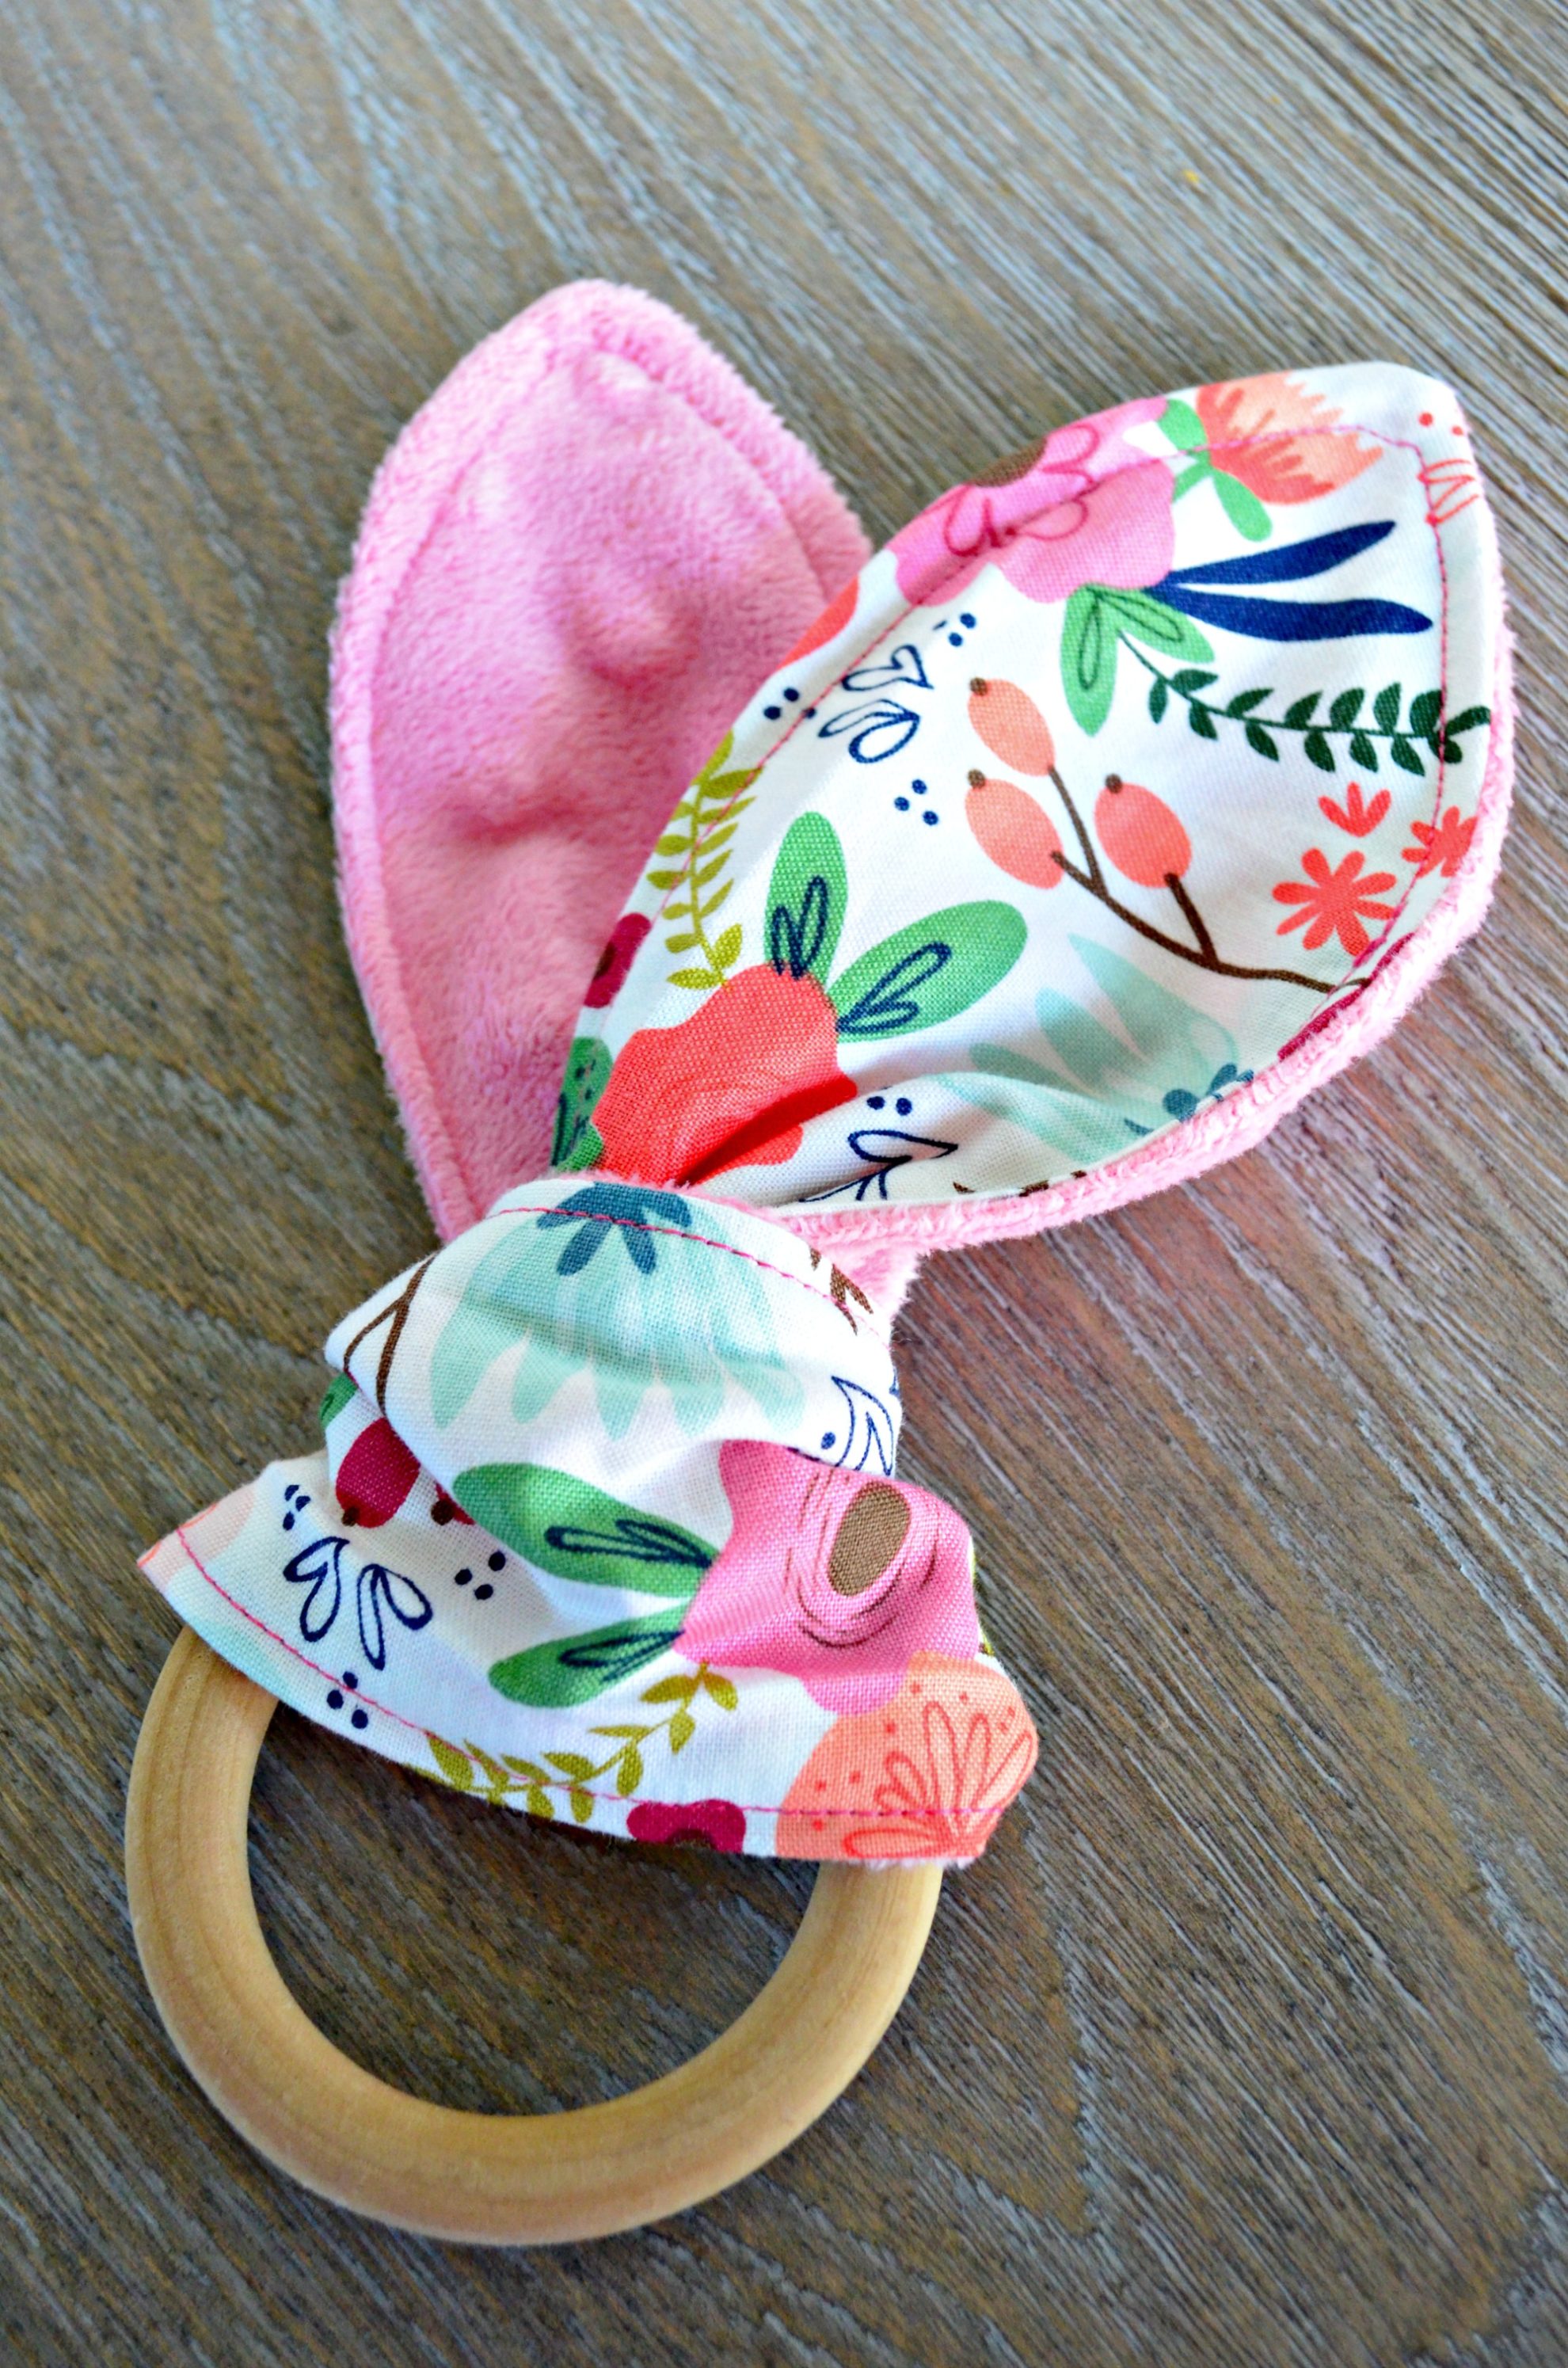 Wooden teething ring with pink and floral fabric tied around it. 